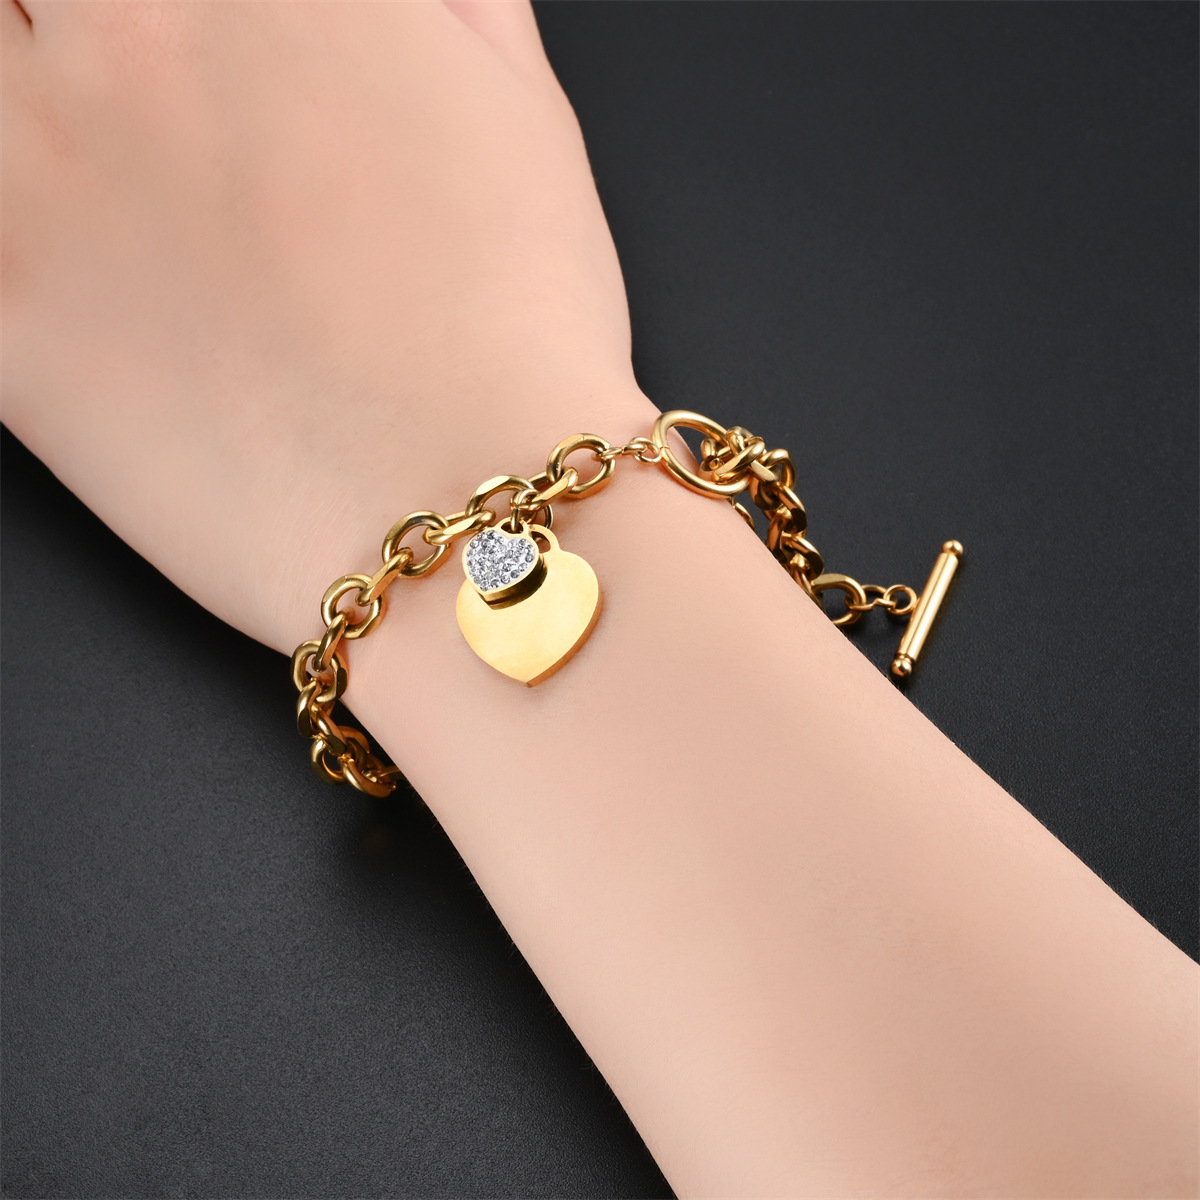 2022 New European and American Fashion Exclusive for Cross-Border Peach Heart Mud Diamond Ot Heart Bracelet Source Manufacturer Quantity Discount